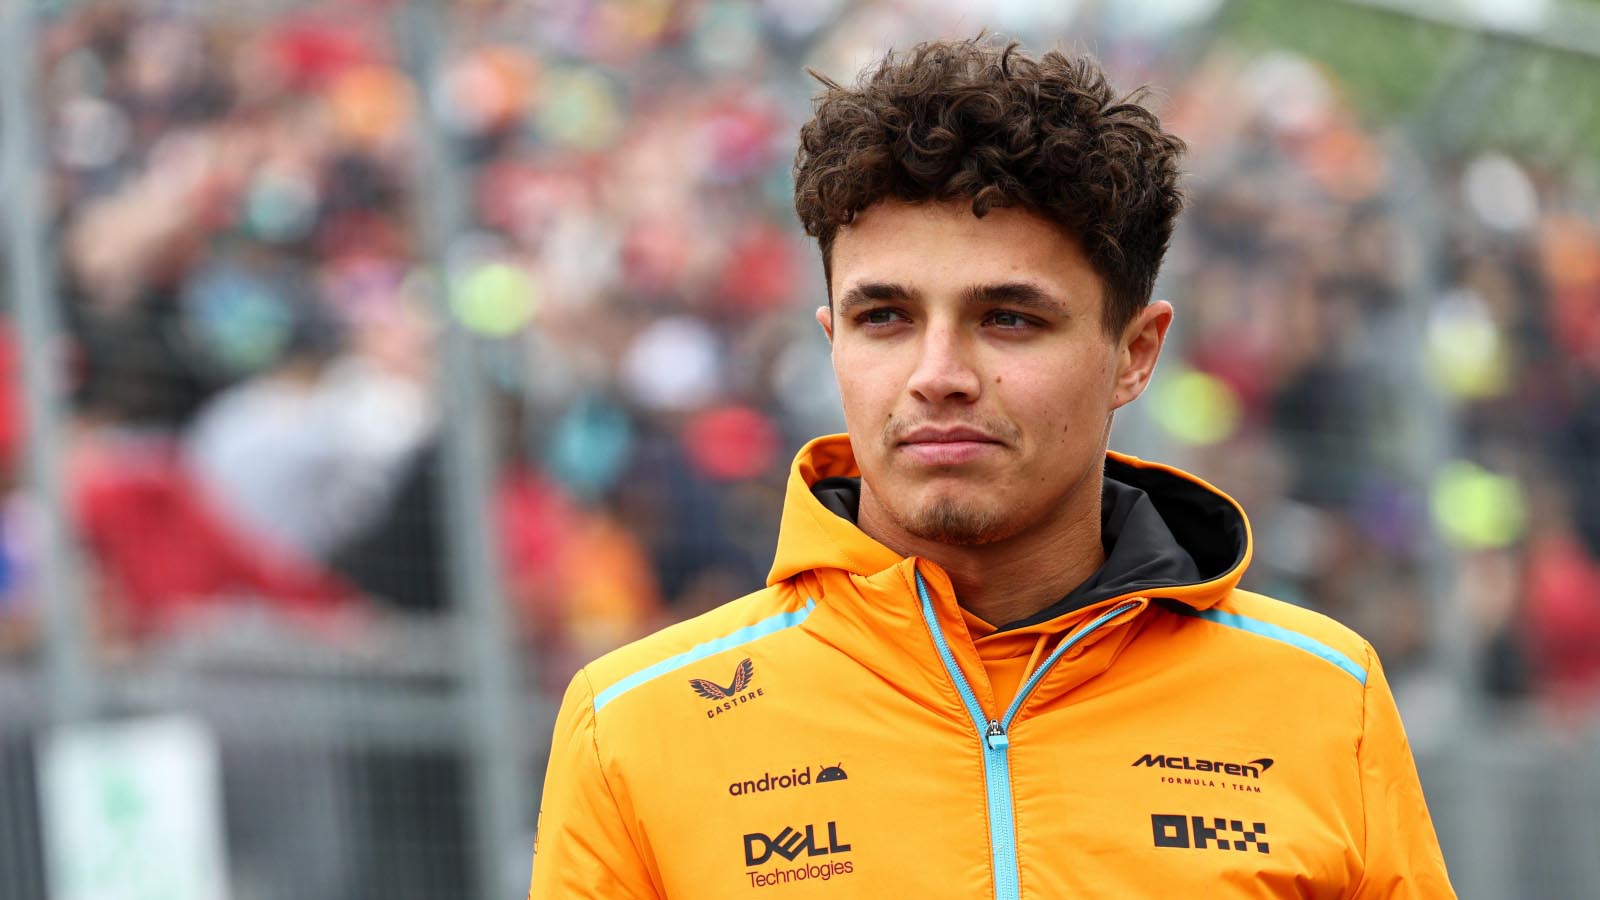 Lando Norris targeted by thieves again as expensive items snatched